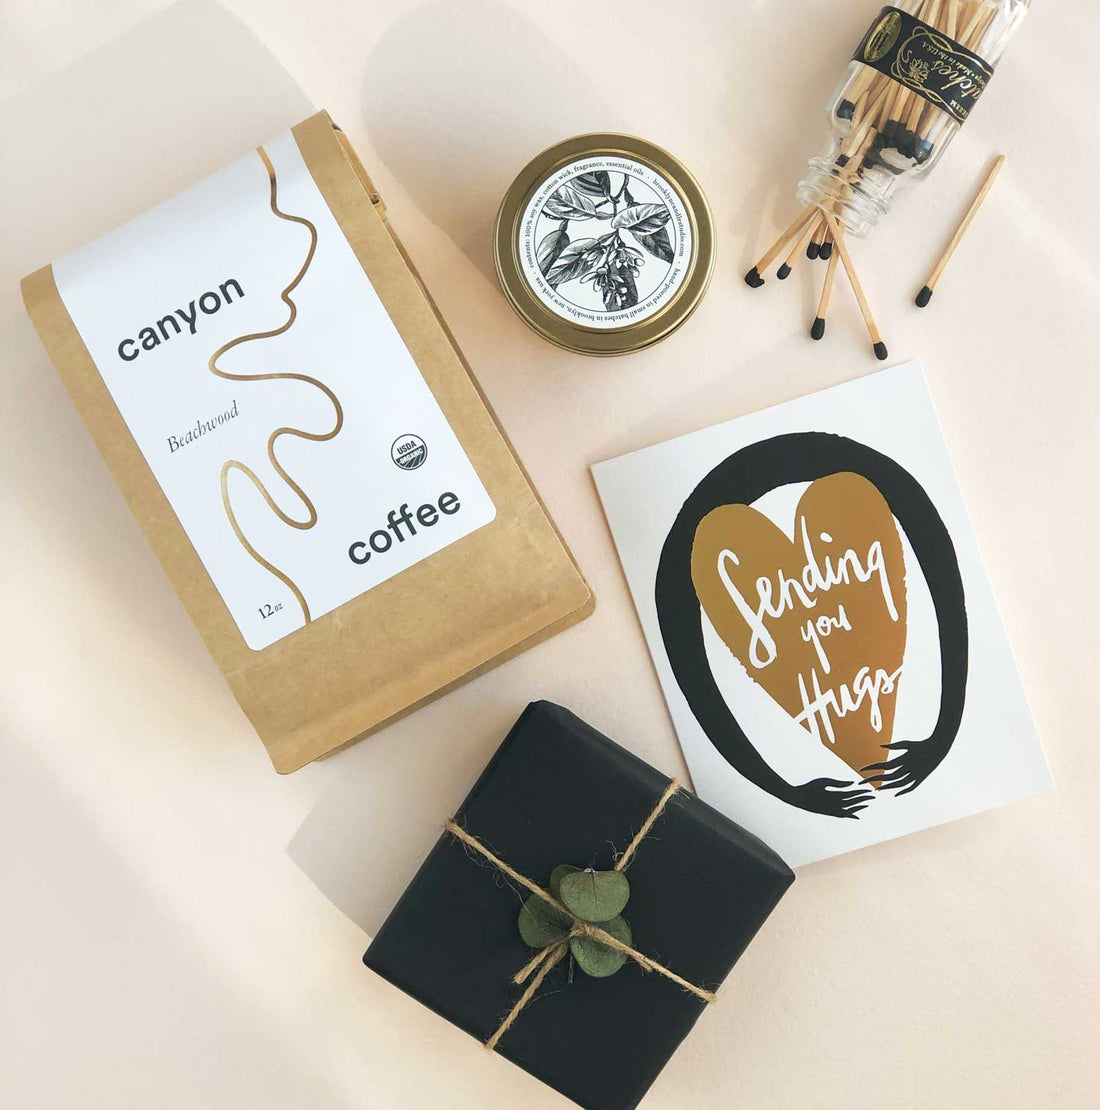 3 Tips for Sympathy Gifting